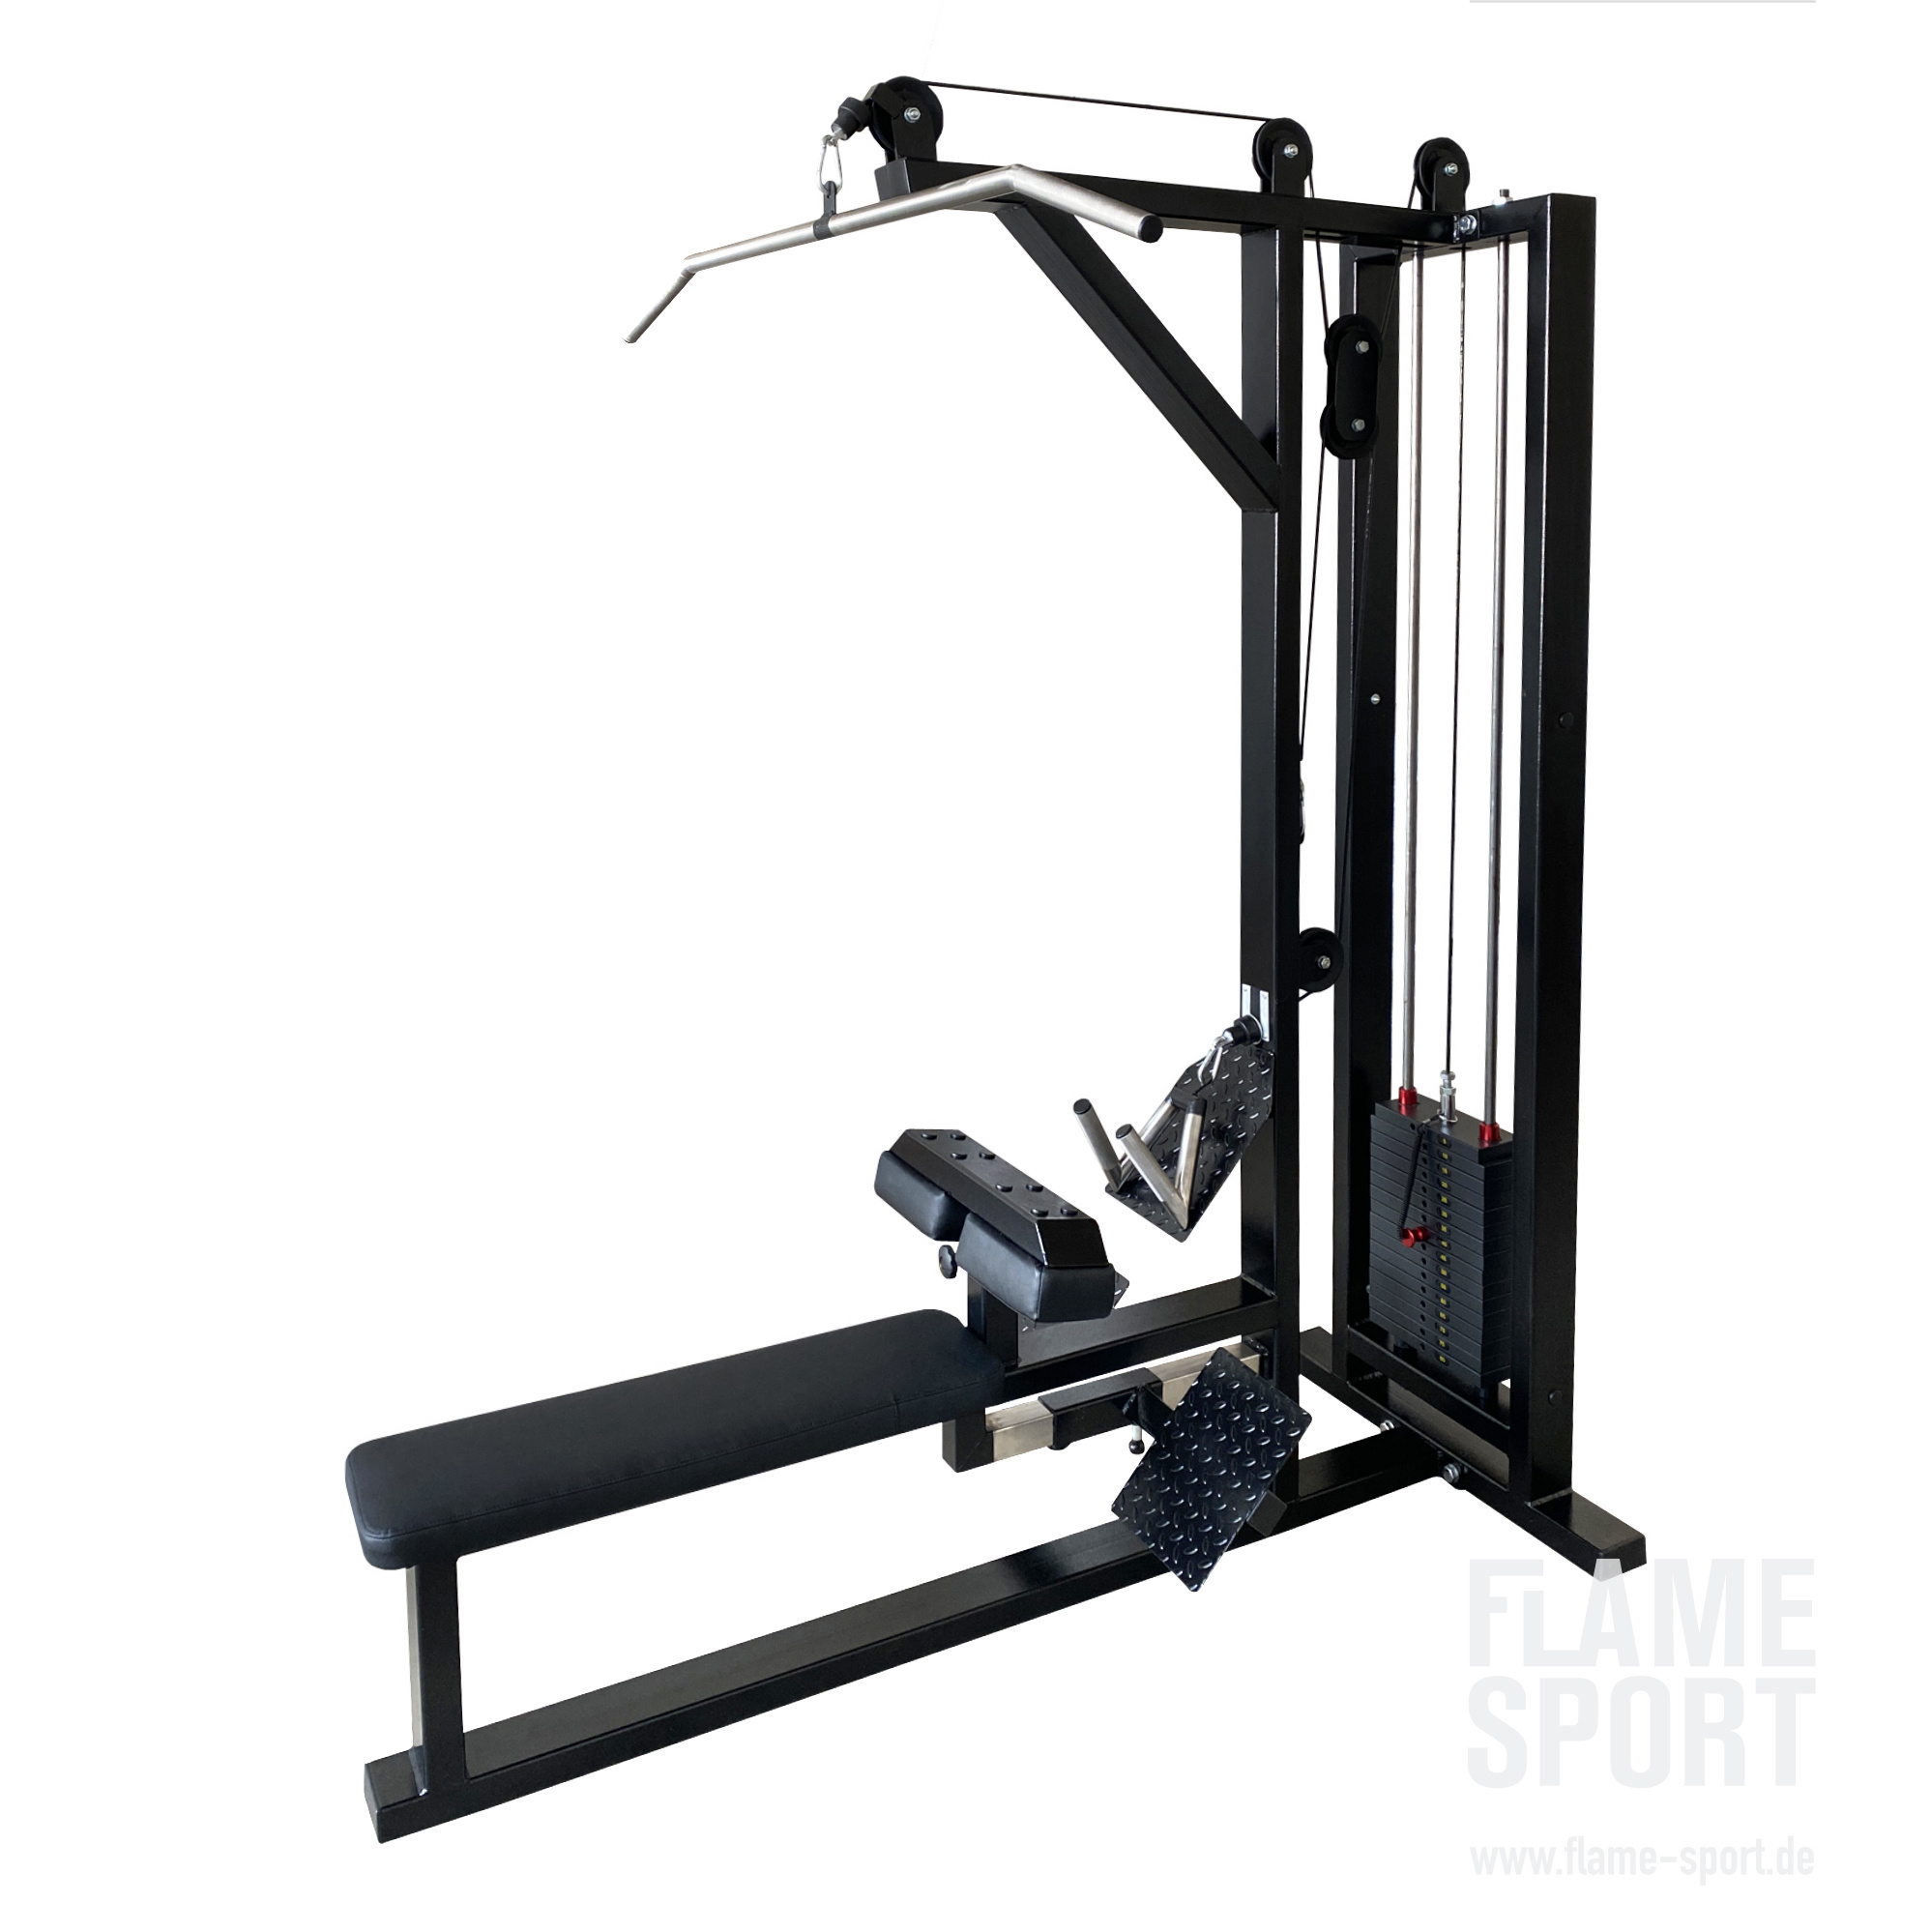 FLAME SPORT 2-in-1: Seated Row and Lat Station (5M)